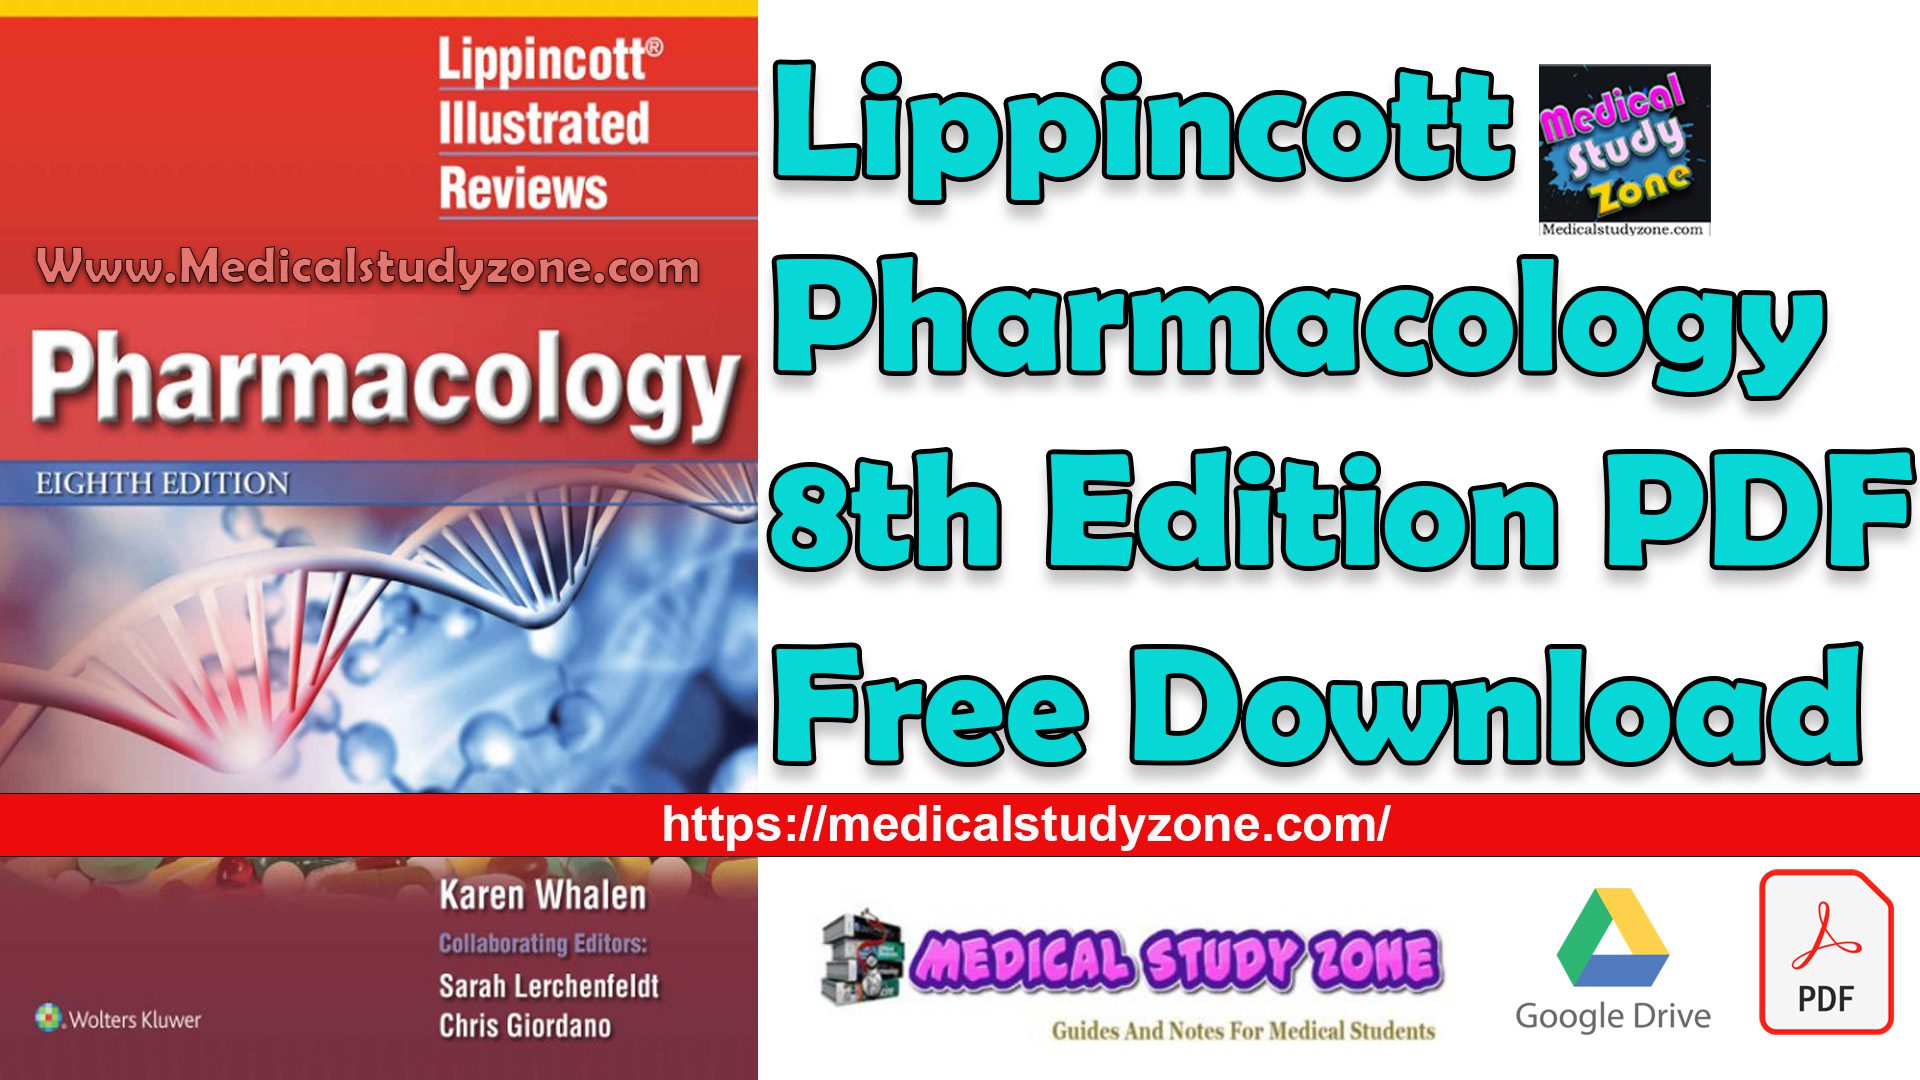 Lippincott Illustrated Reviews: Pharmacology 8th Edition PDF Free Download